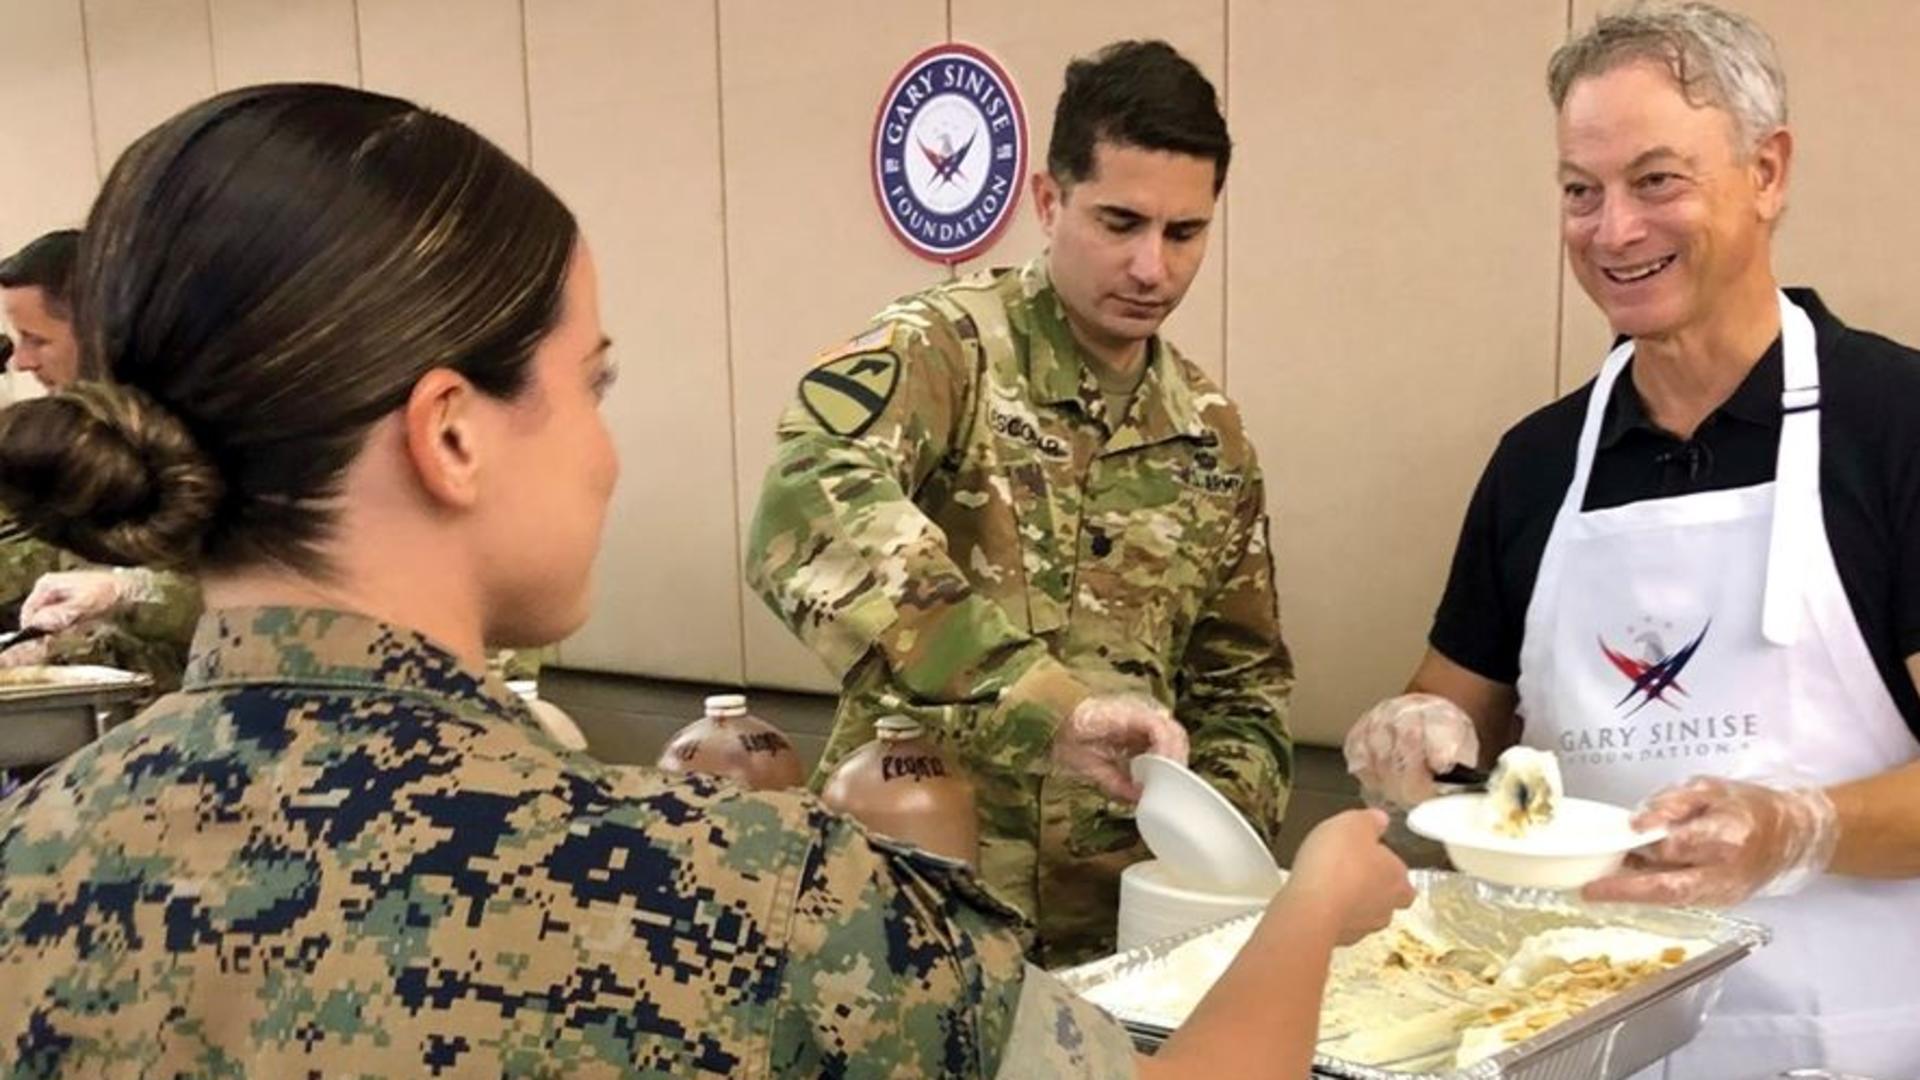 Gary Sinise: Serving Those Who’ve Served